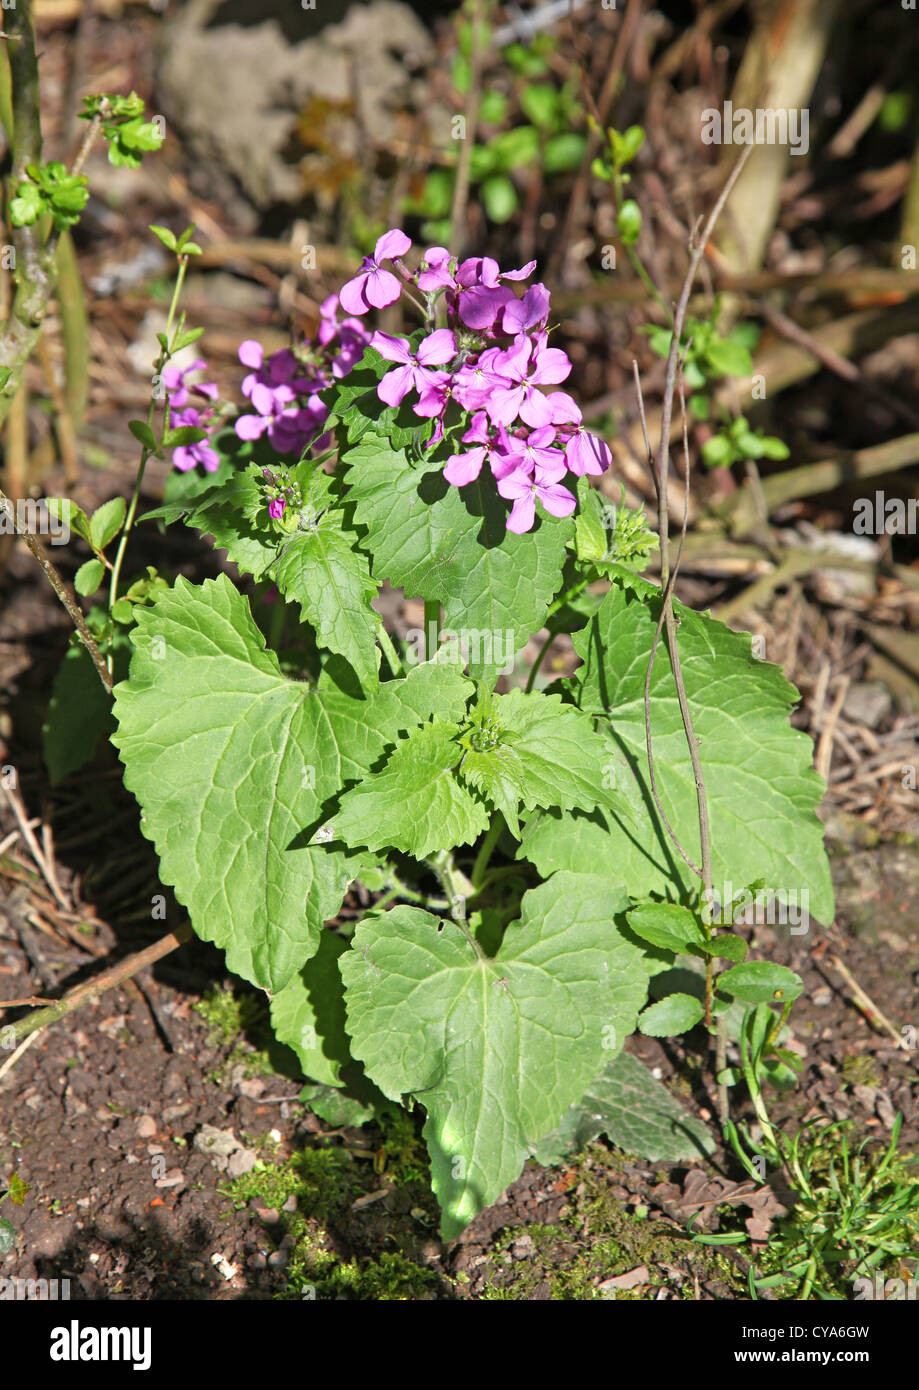 The purple pink flowers of an annual Honesty flower (Lunaria annua) Stock Photo